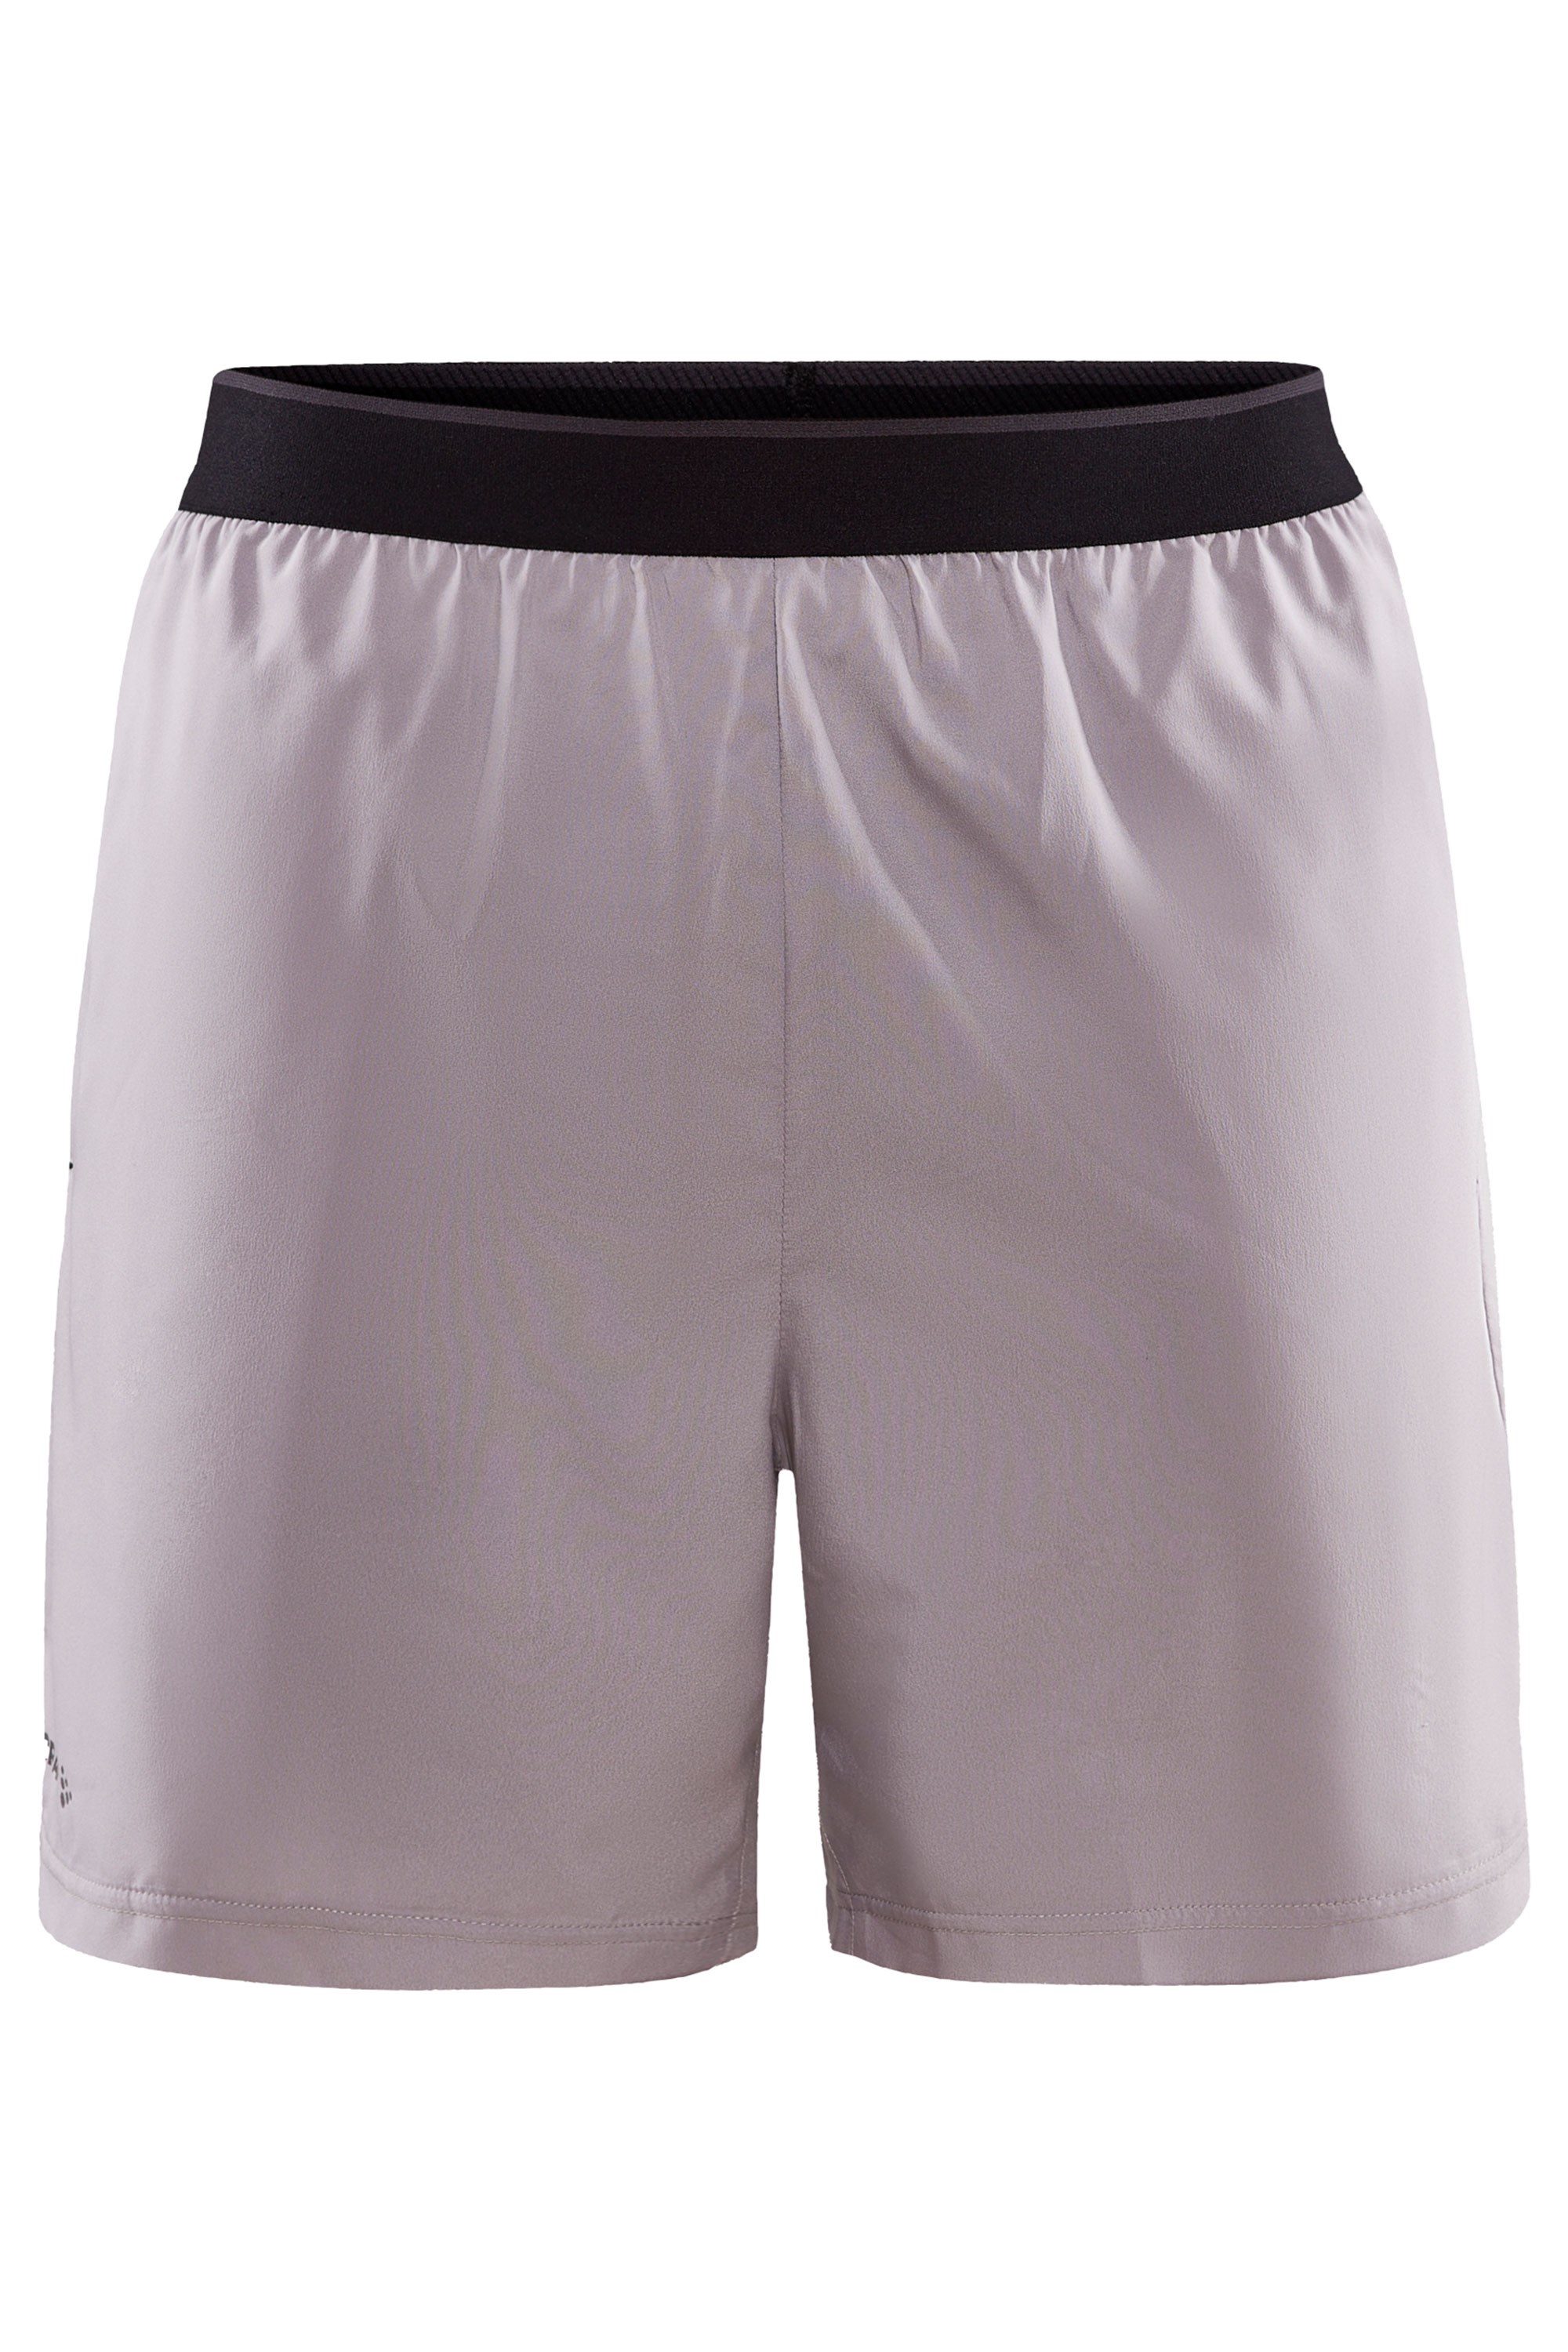 Advance Charge Mens 2 In 1 Stretch Training Shorts -